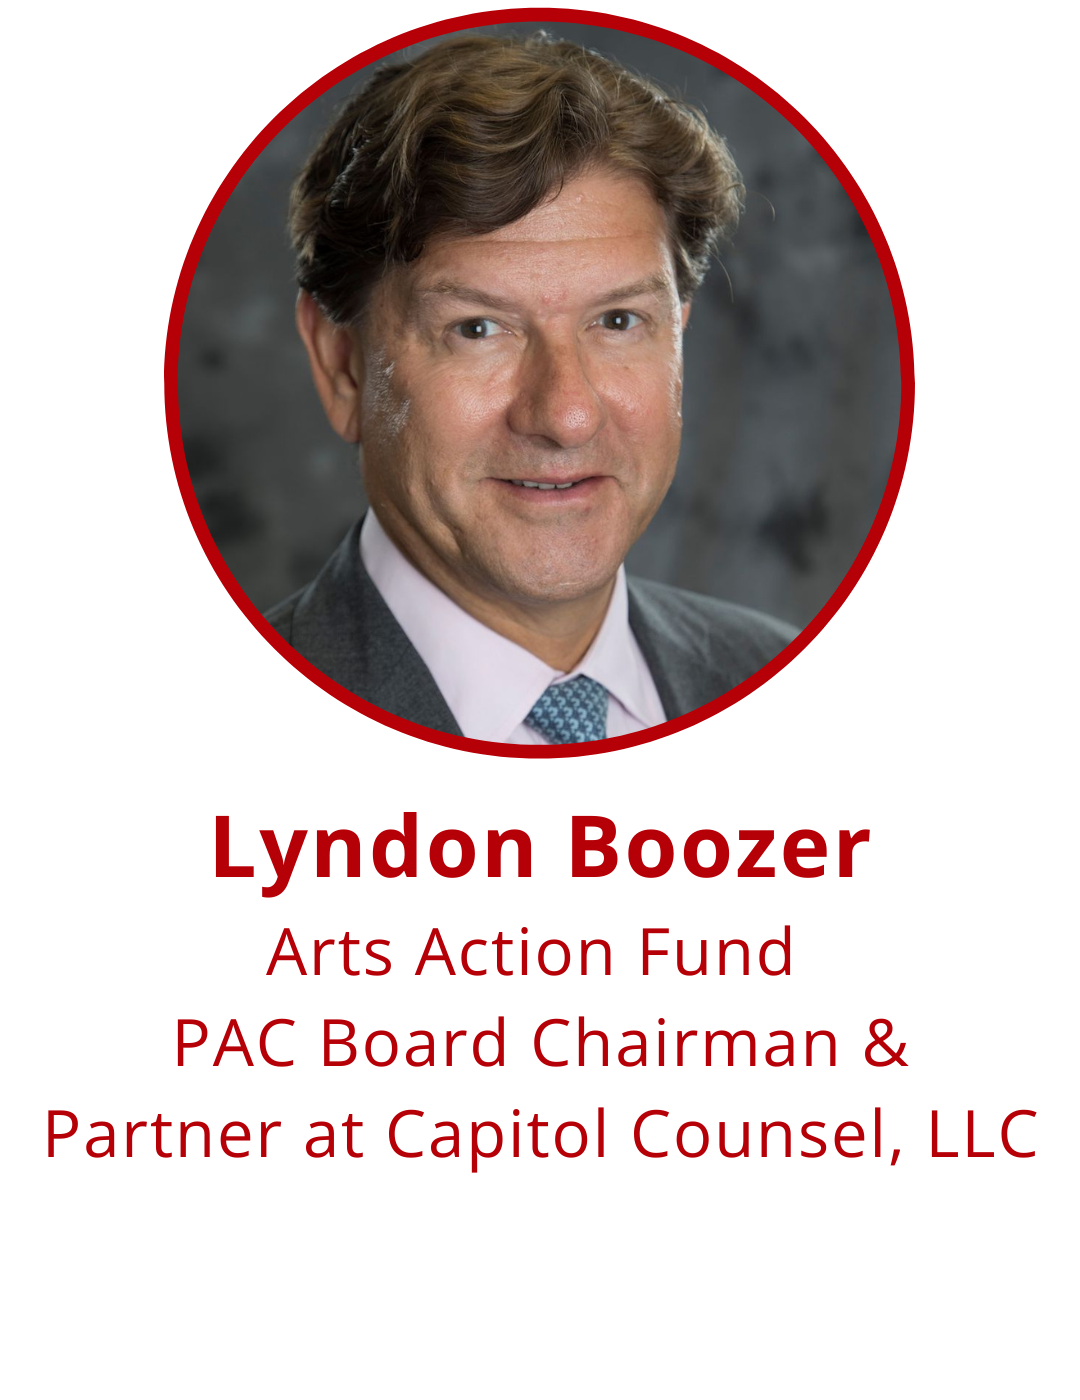 Lyndon Boozer Arts Action Fund; PAC Board Chairman & Partner at Capitol Counsel, LLC